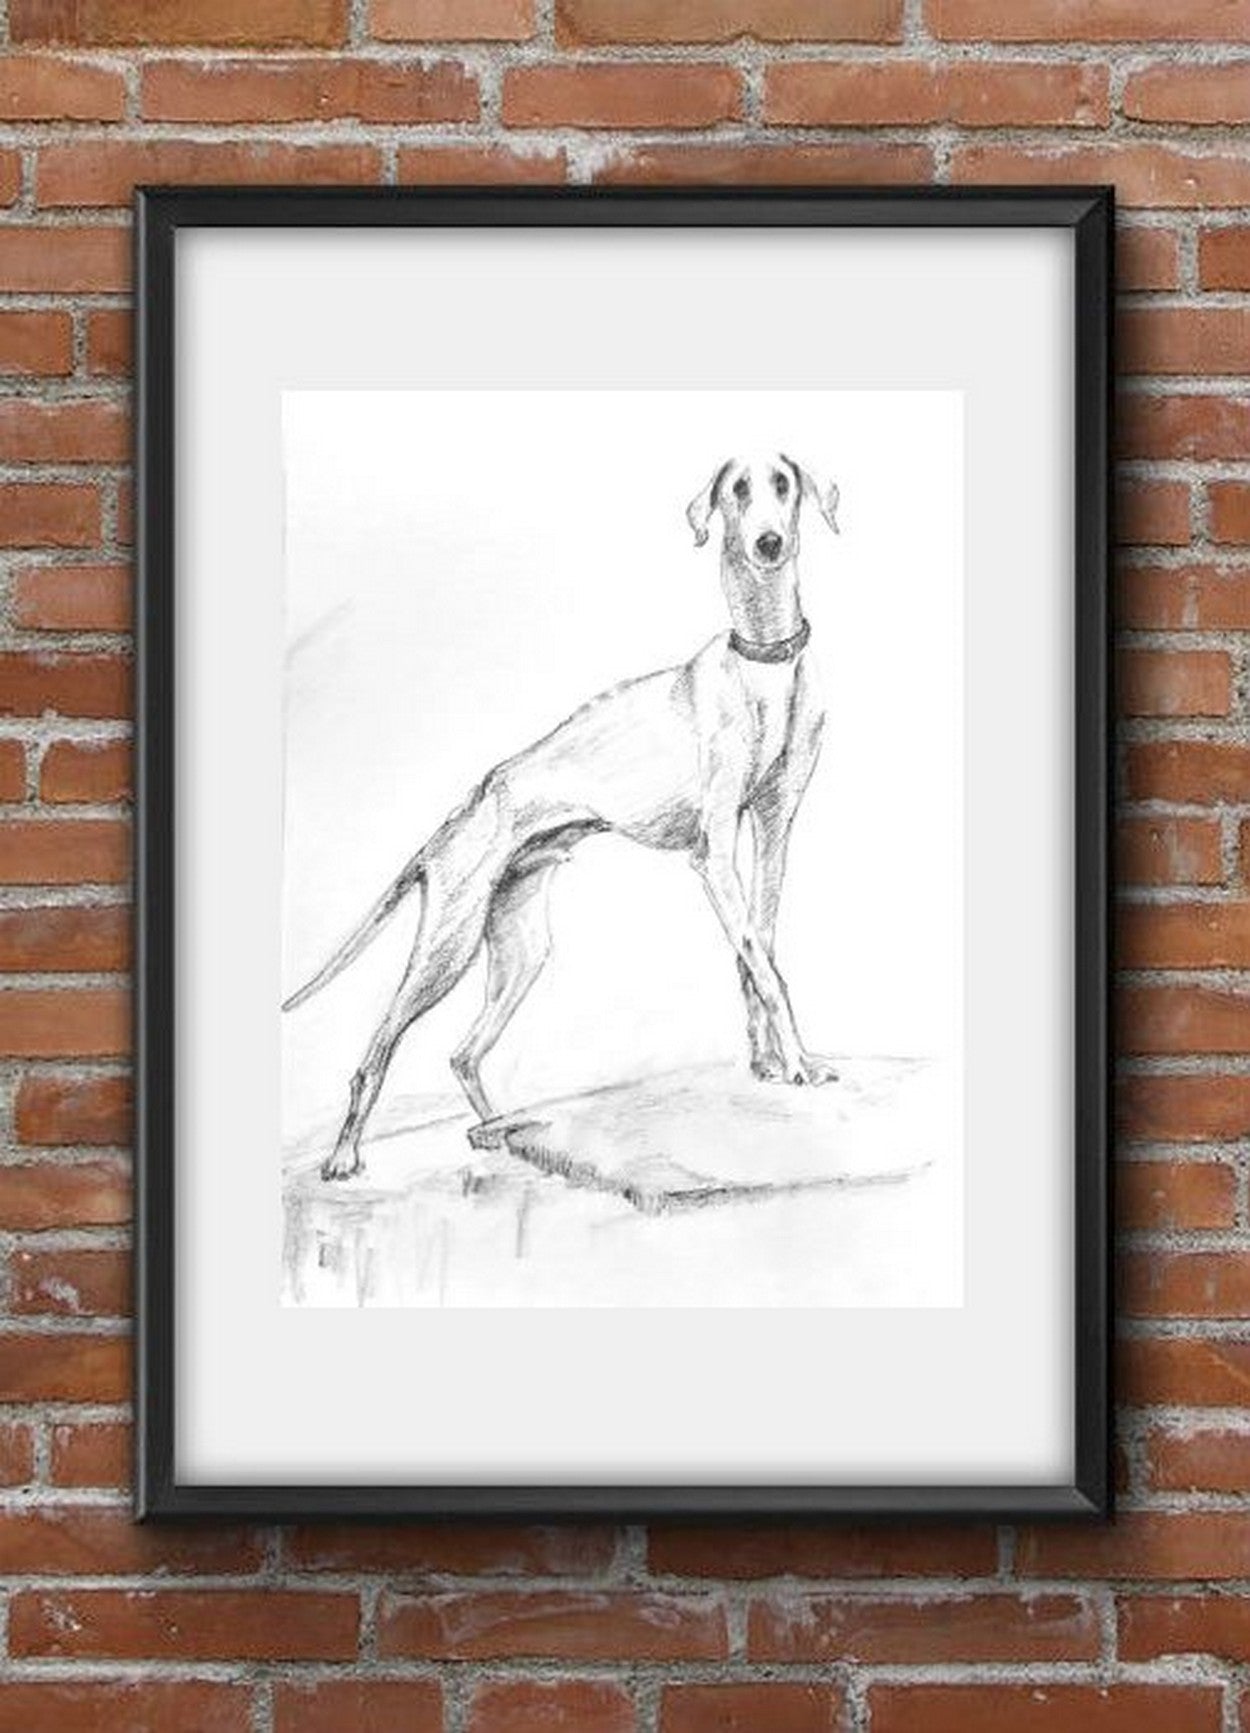 Virtual frame view, The Famous Indian Mudhol breed dog, pencil sketch on paper